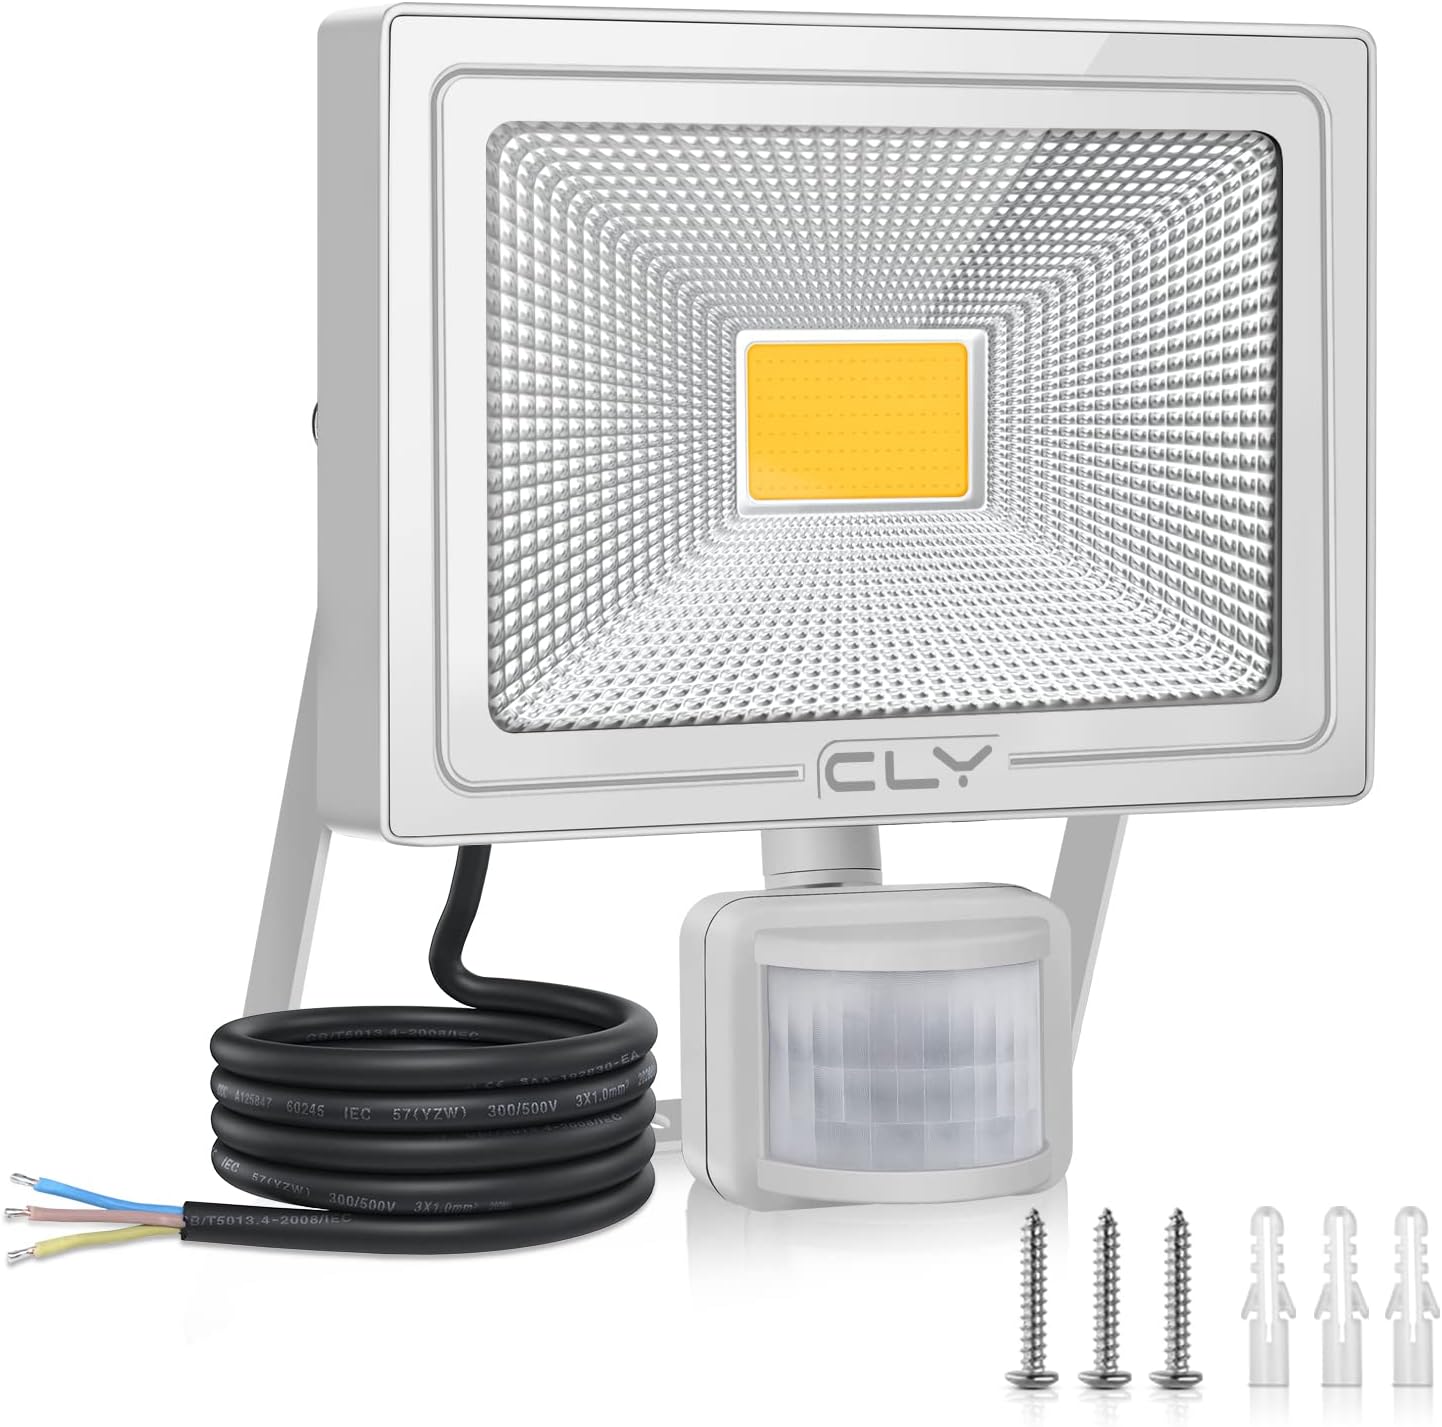 CLY Security Lights with Motion Sensor, 50W Led Floodlight with PIR Sensor